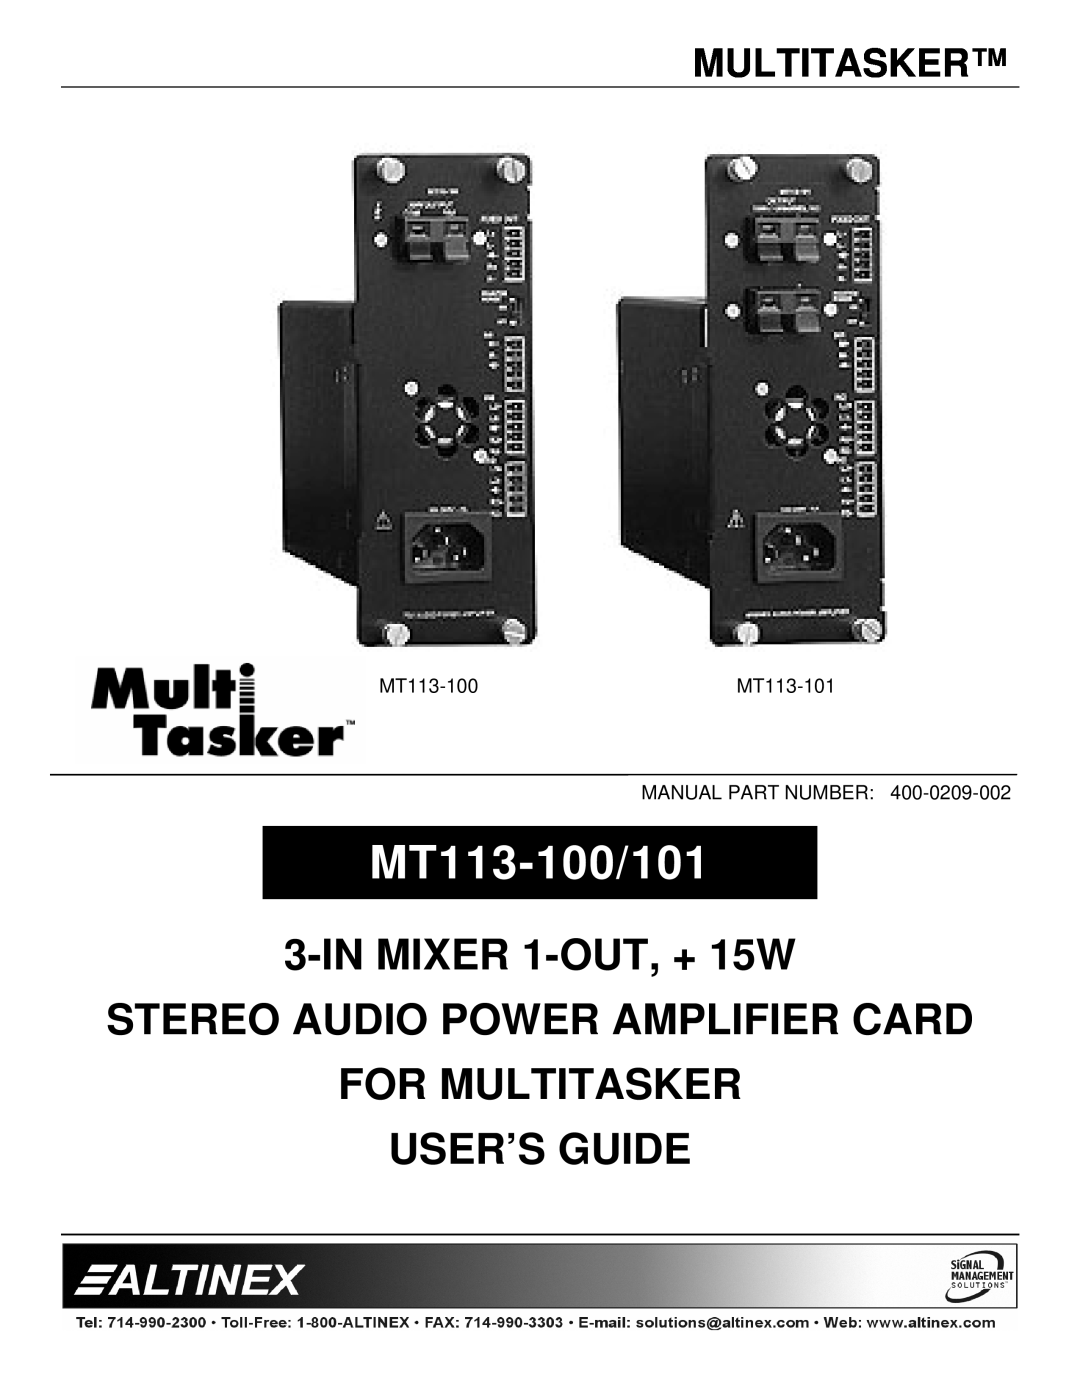 Altinex manual MT113-100/101, INMIXER 1-OUT,+ 15W, Stereo Audio Power Amplifier Card For Multitasker, User’S Guide 